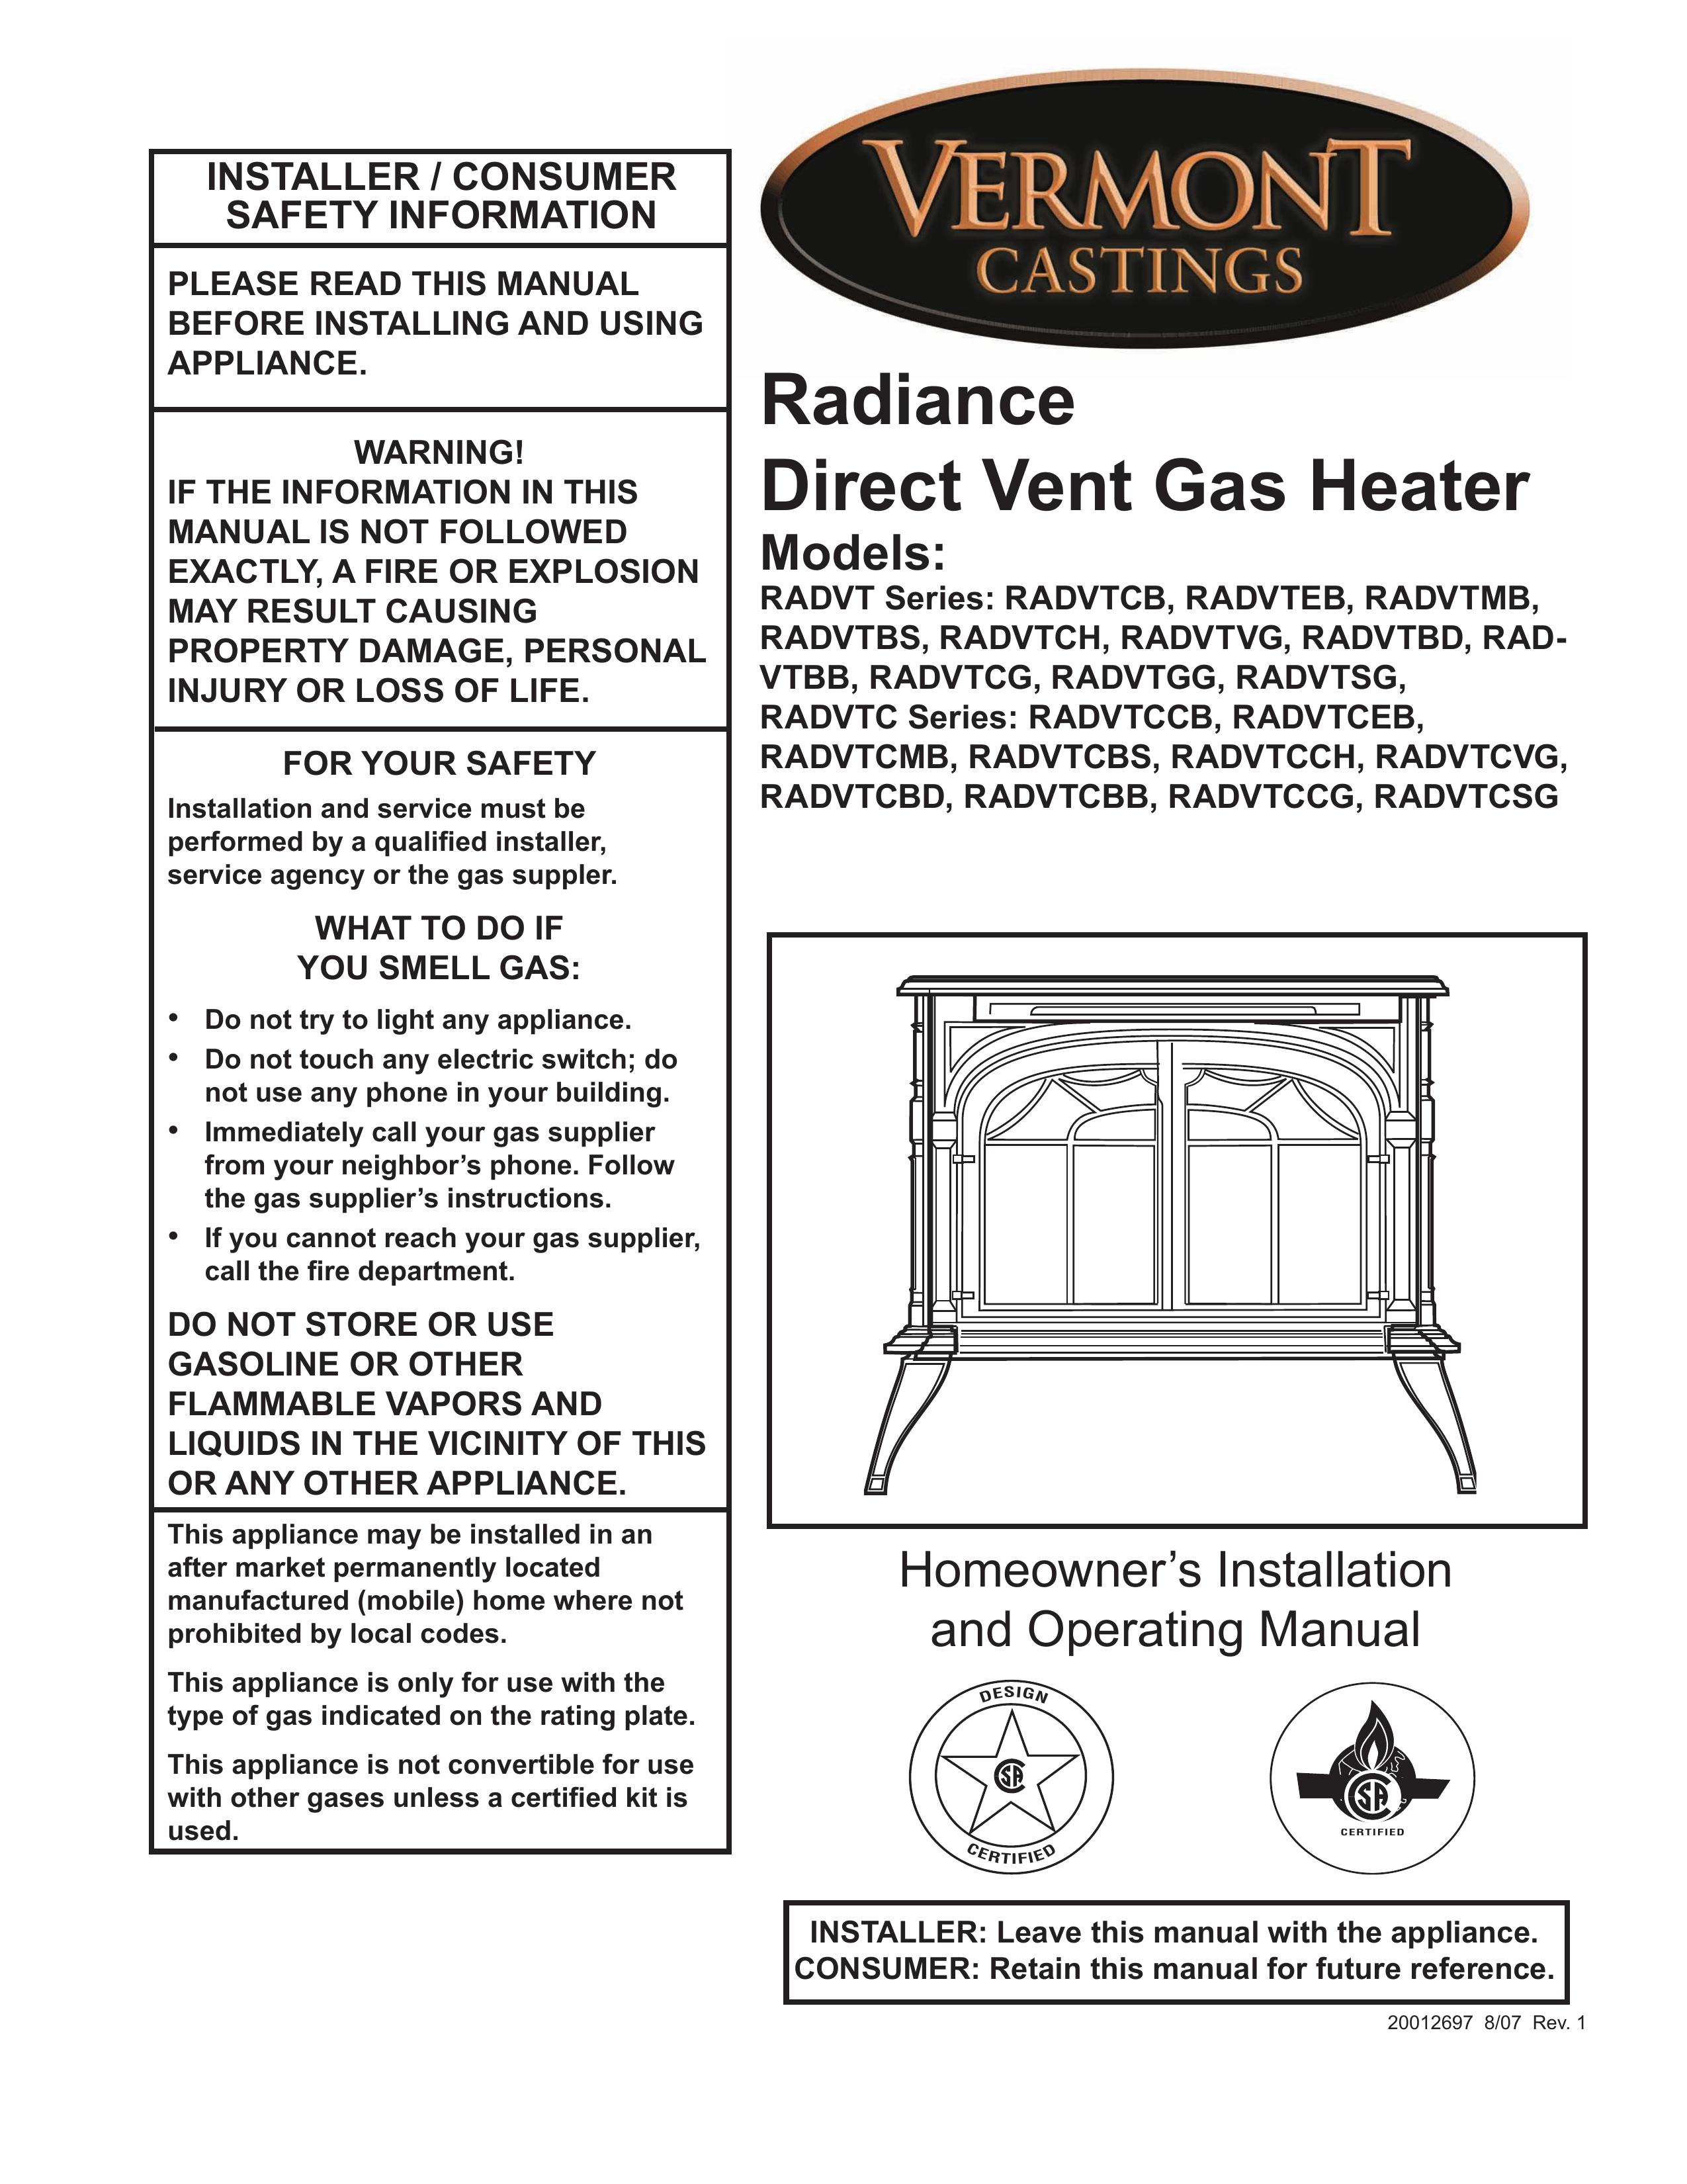 Vermont Casting RADVTMB Outdoor Fireplace User Manual